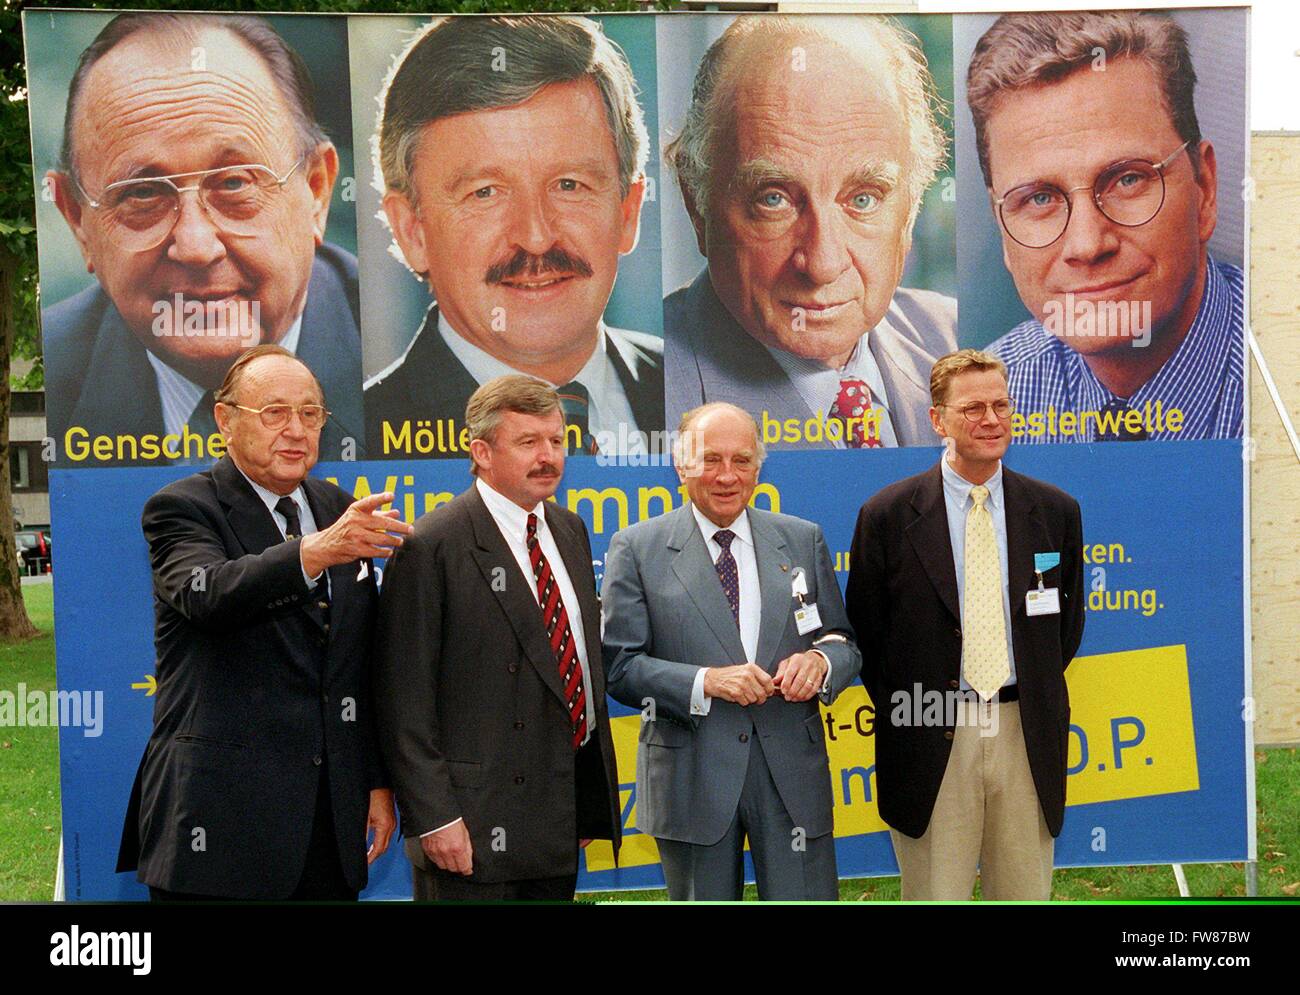 FDP honorary chairman Hans-Dietrich Genscher, FDP chairman of North-Rhine Westphalia Jürgen Möllemann, FDP honorary chairman Otto Graf Lambsdorff and FDP general secretary Guido Westerwelle shortly before the beginning of the FDP special party conference in Bonn on 29 August 1998. Stock Photo